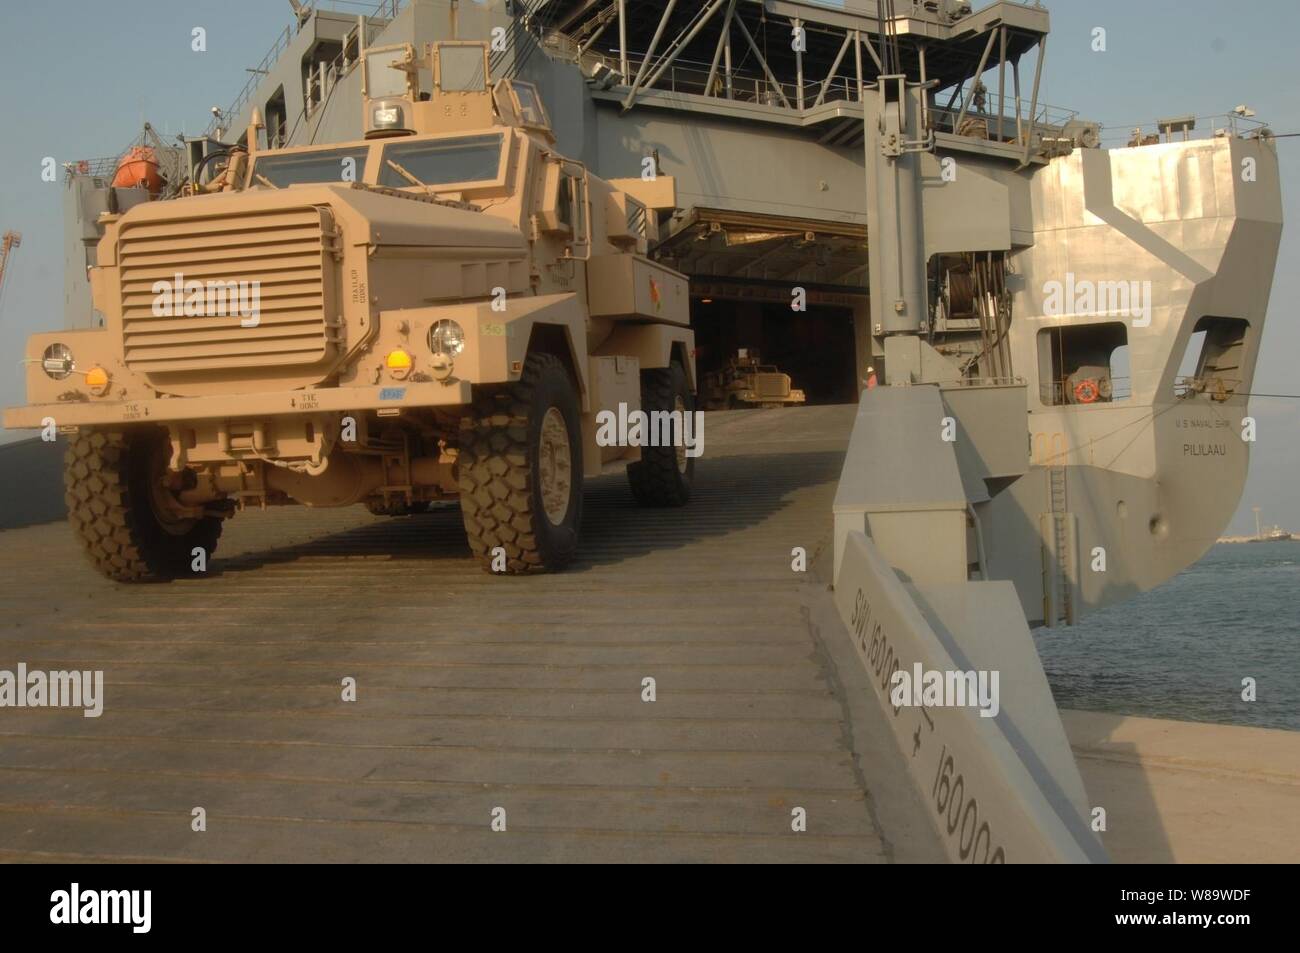 A Mine Resistant Ambush Protected Vehicle (MRAP) drives down the ramp of the Military Sealift Command USNS Pililaau (T-AKR 304) onto the pier at Ash Shu'aybah Port, Kuwait, on Jan. 13, 2008.  More than 200 MRAPs are being unloaded from the roll-on/roll-off ship for transfer to Iraq and Afghanistan. Stock Photo